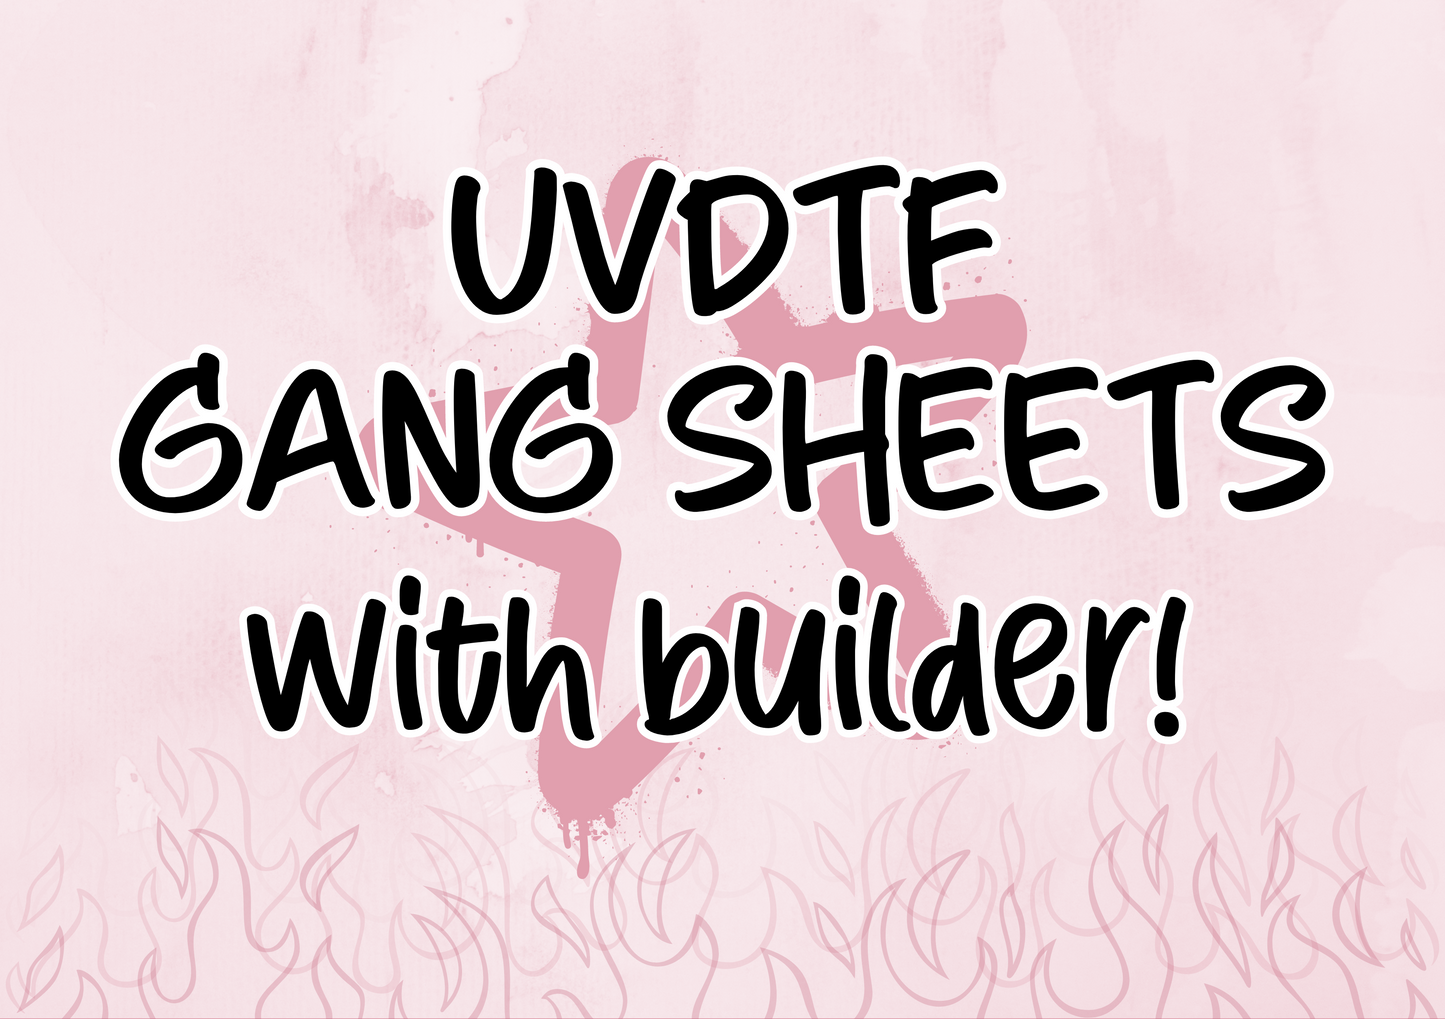 UVDTF Gang Sheets with Builder